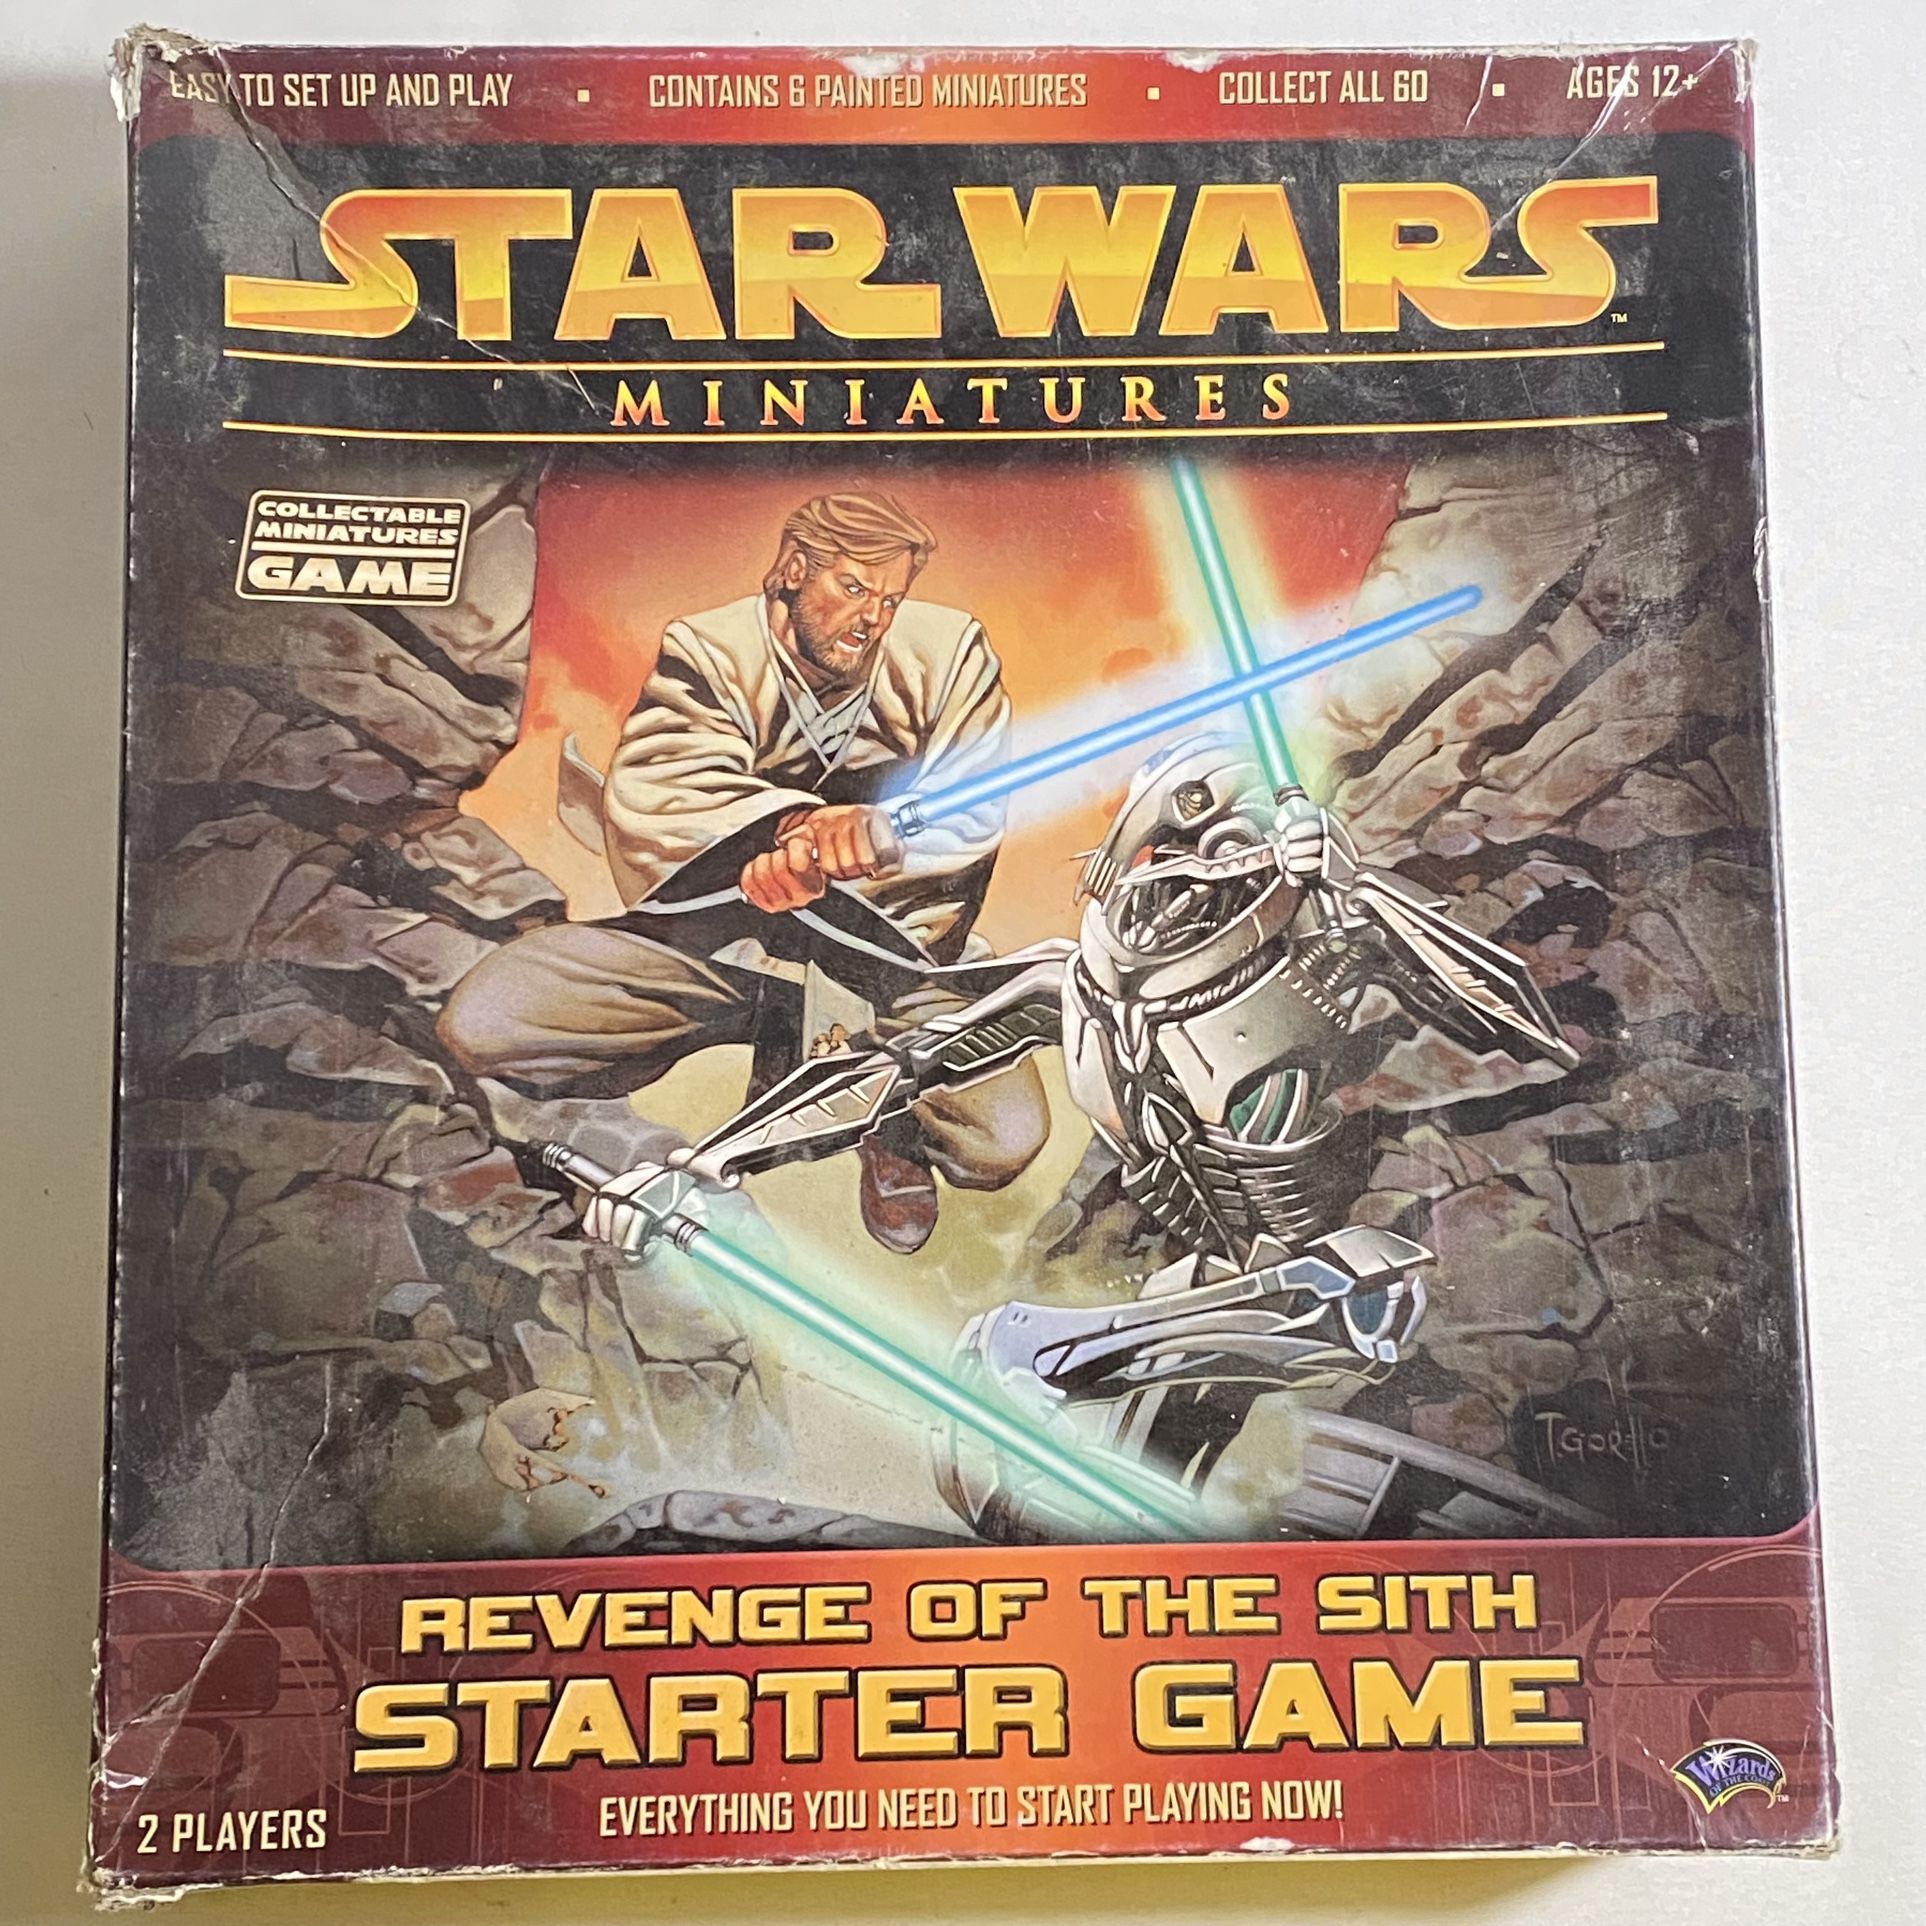 Star Wars Miniatures Revenge of the Sith Starter Game Wizards Used